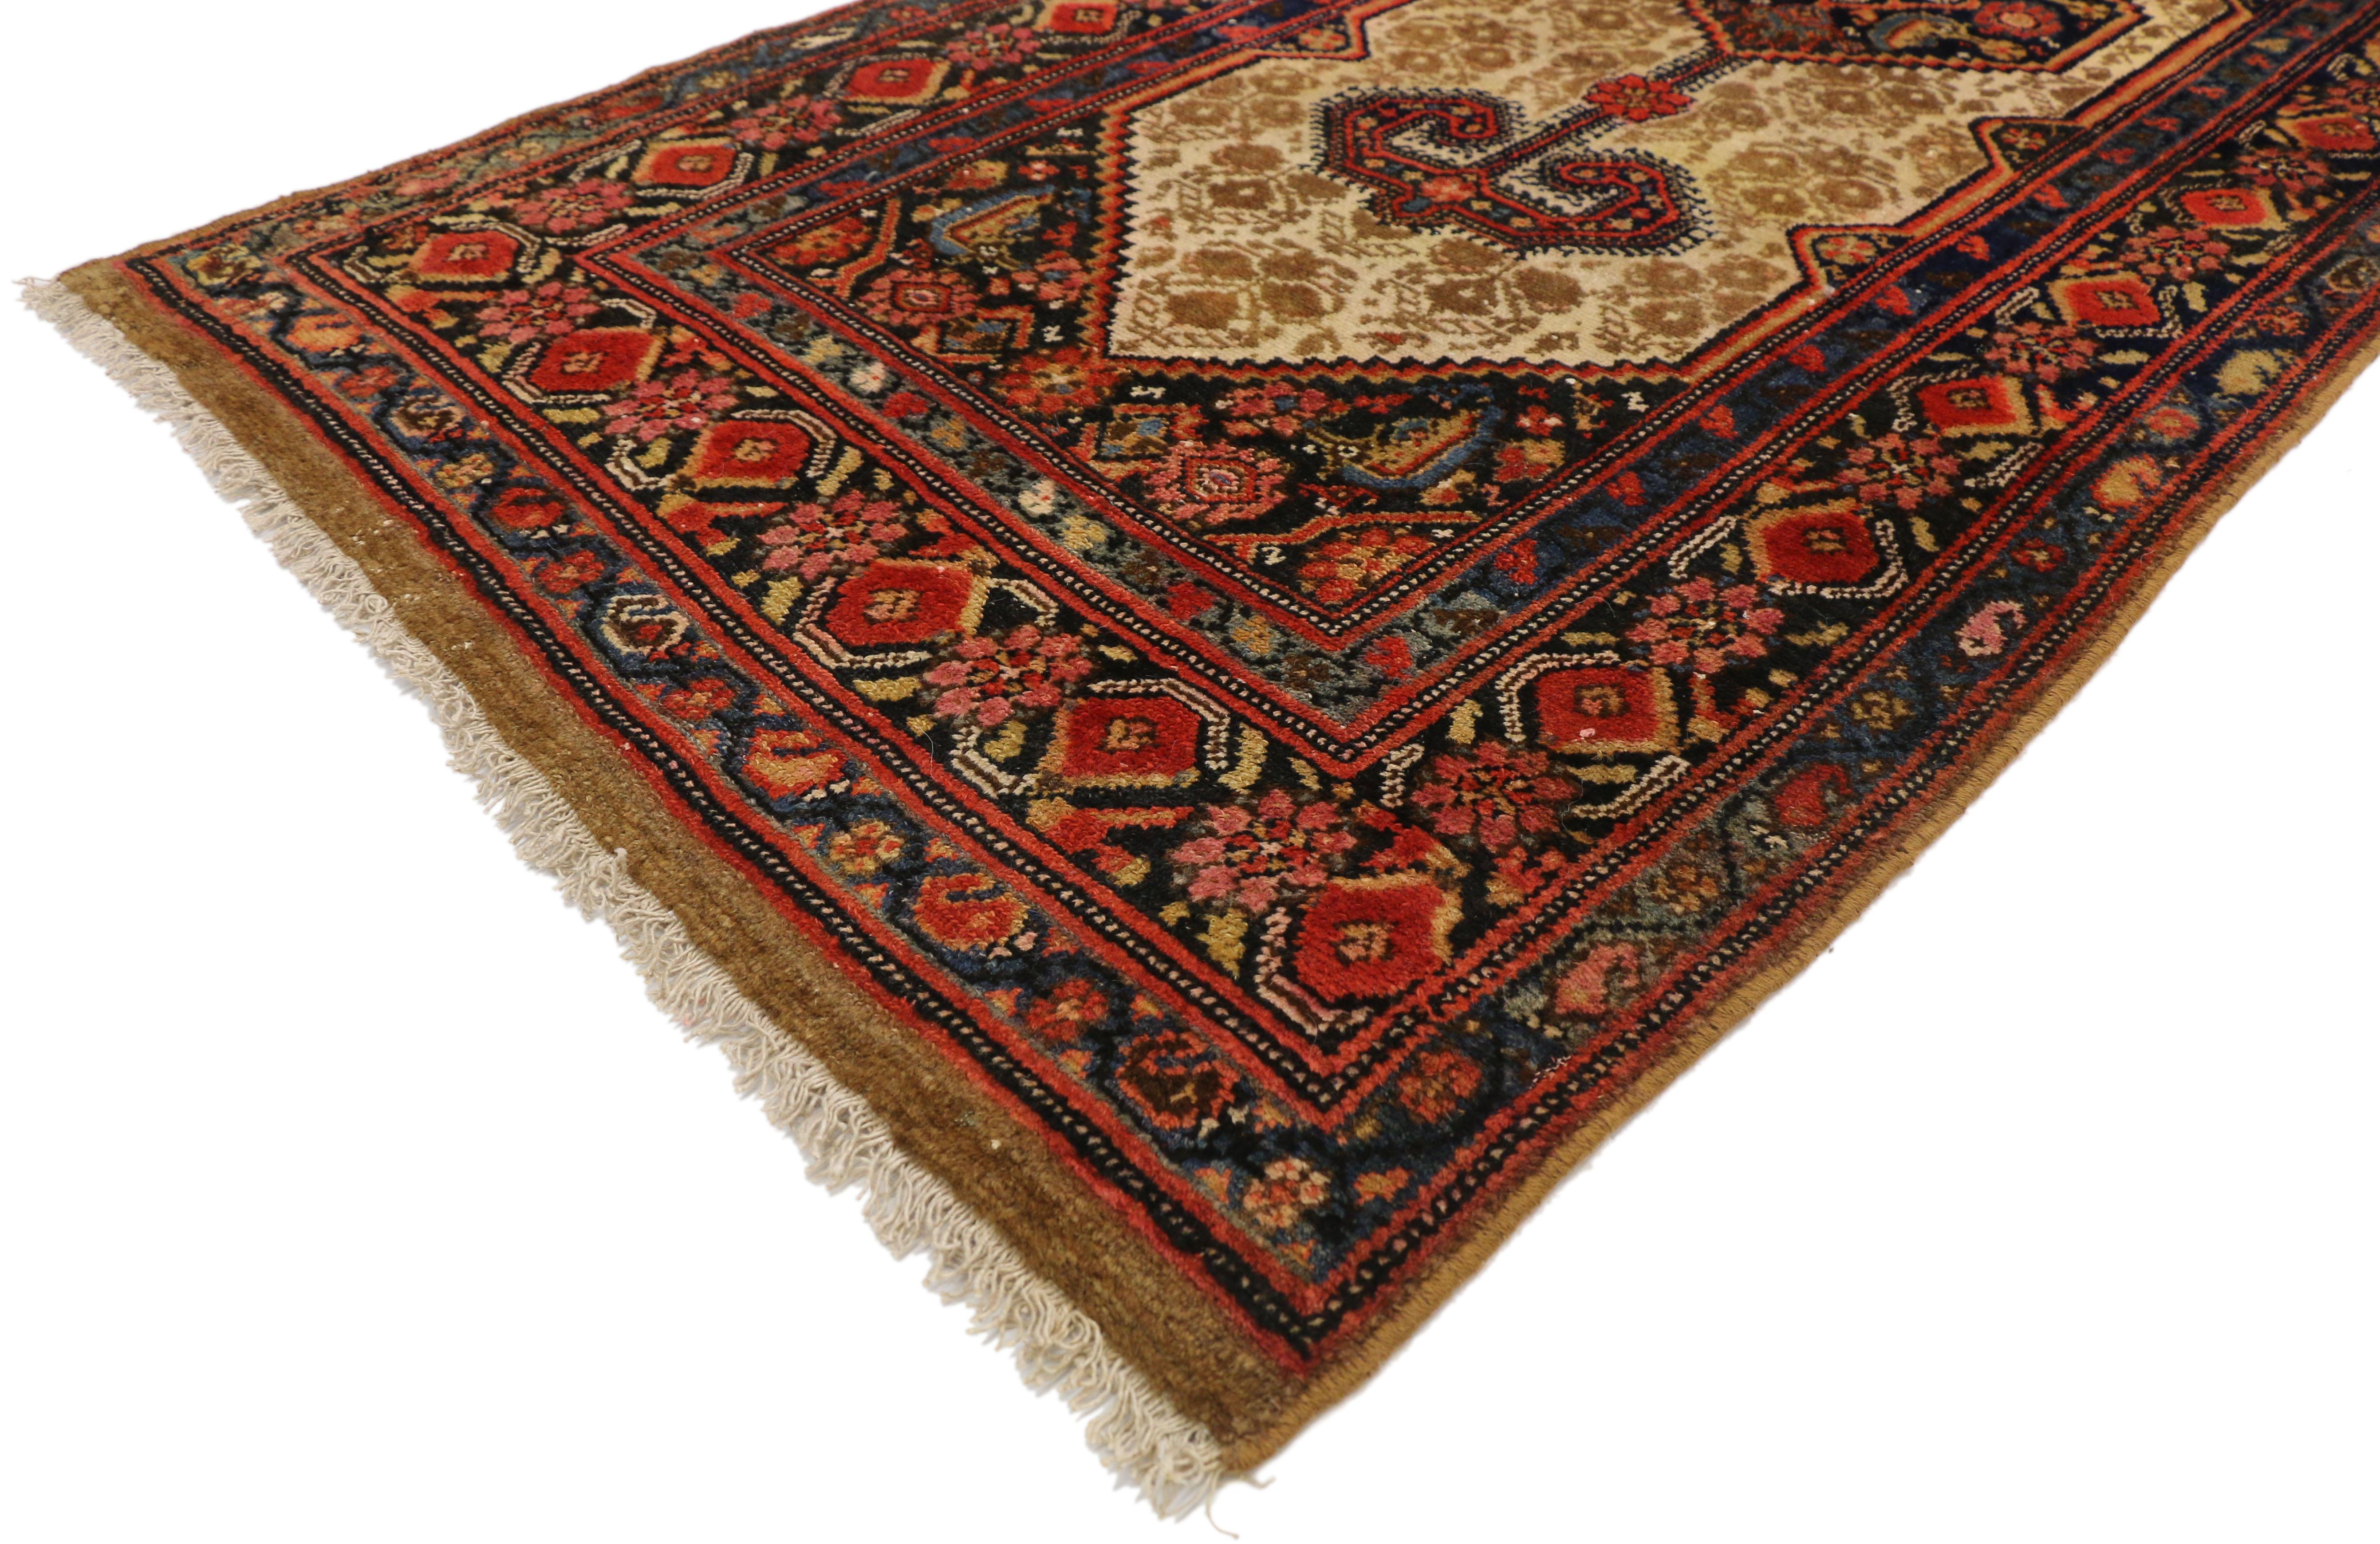 77292 antique Persian Malayer long hallway runner with Tudor Manor House style. This hand knotted wool antique Persian Malayer runner features amulet medallions with a Herati pattern and outlined with zigzag and jagged edges flanked with Ram's horn